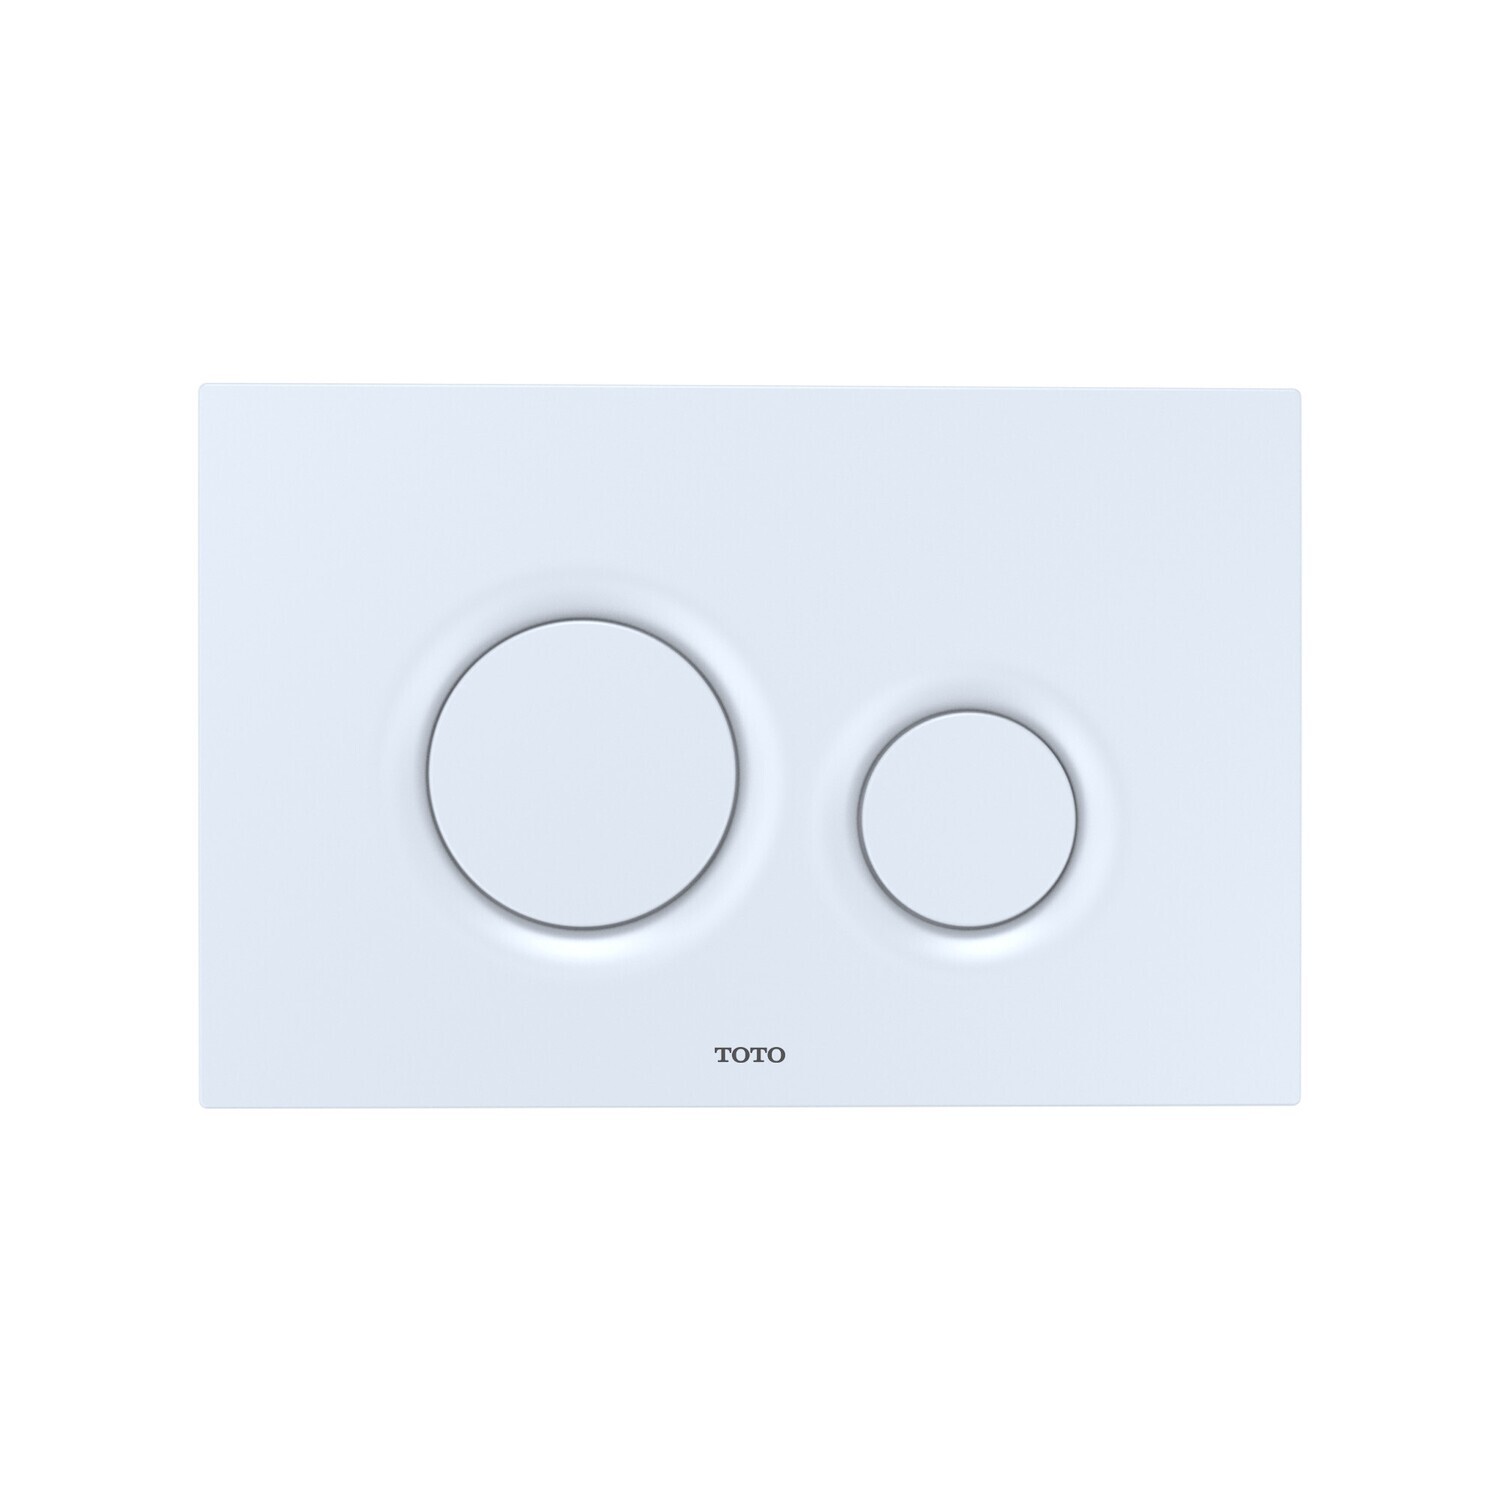 TOTO - Basic Square Push Plate - Dual Button, White Matte YT920#WH